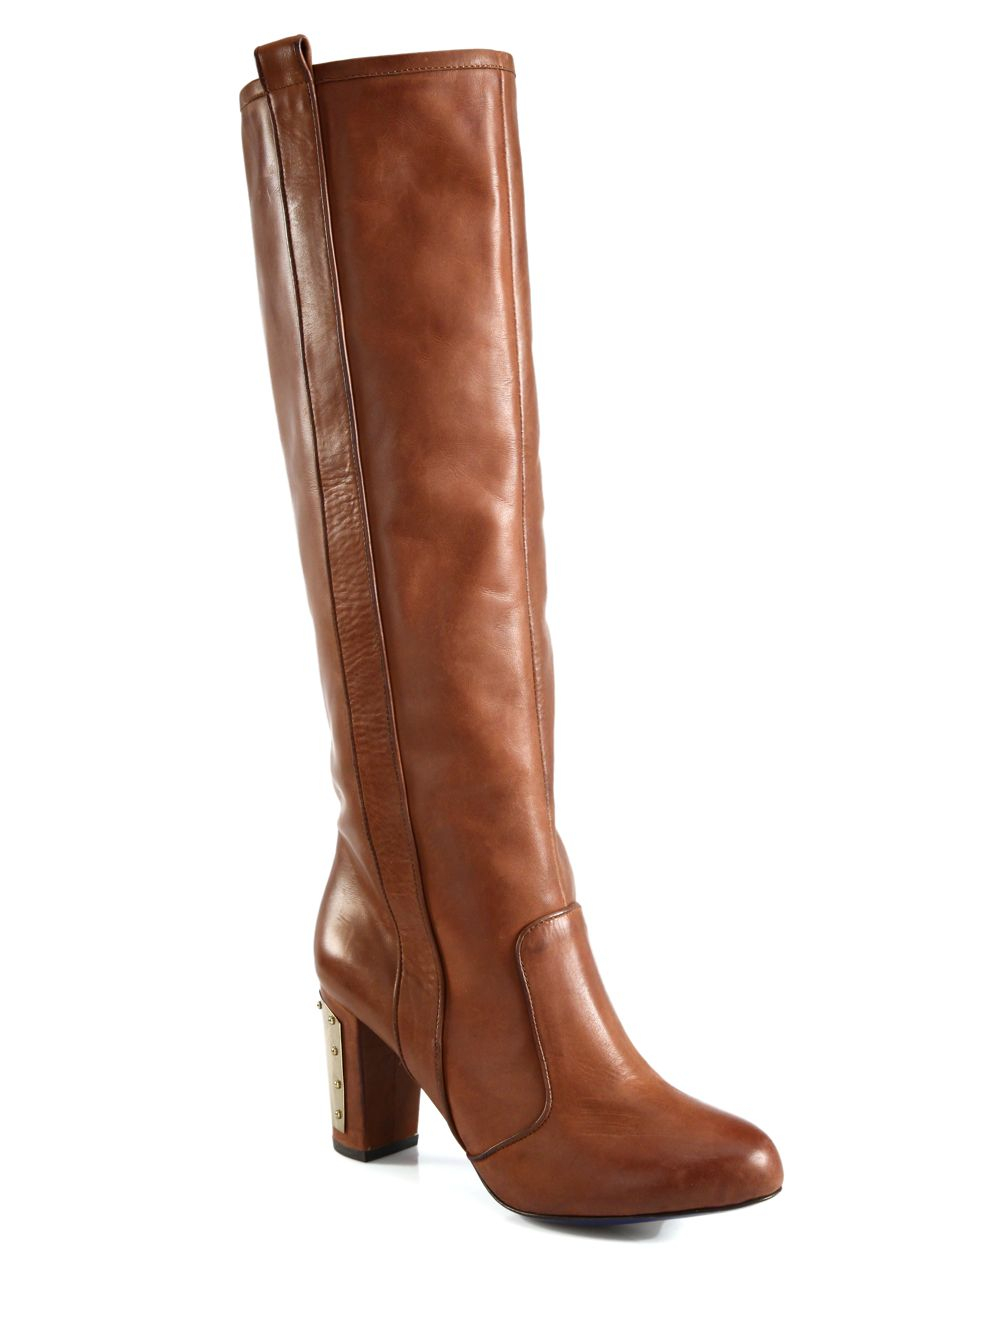 Lyst - Rebecca Minkoff Sari Leather and Metal Heel Knee High Boots in Brown